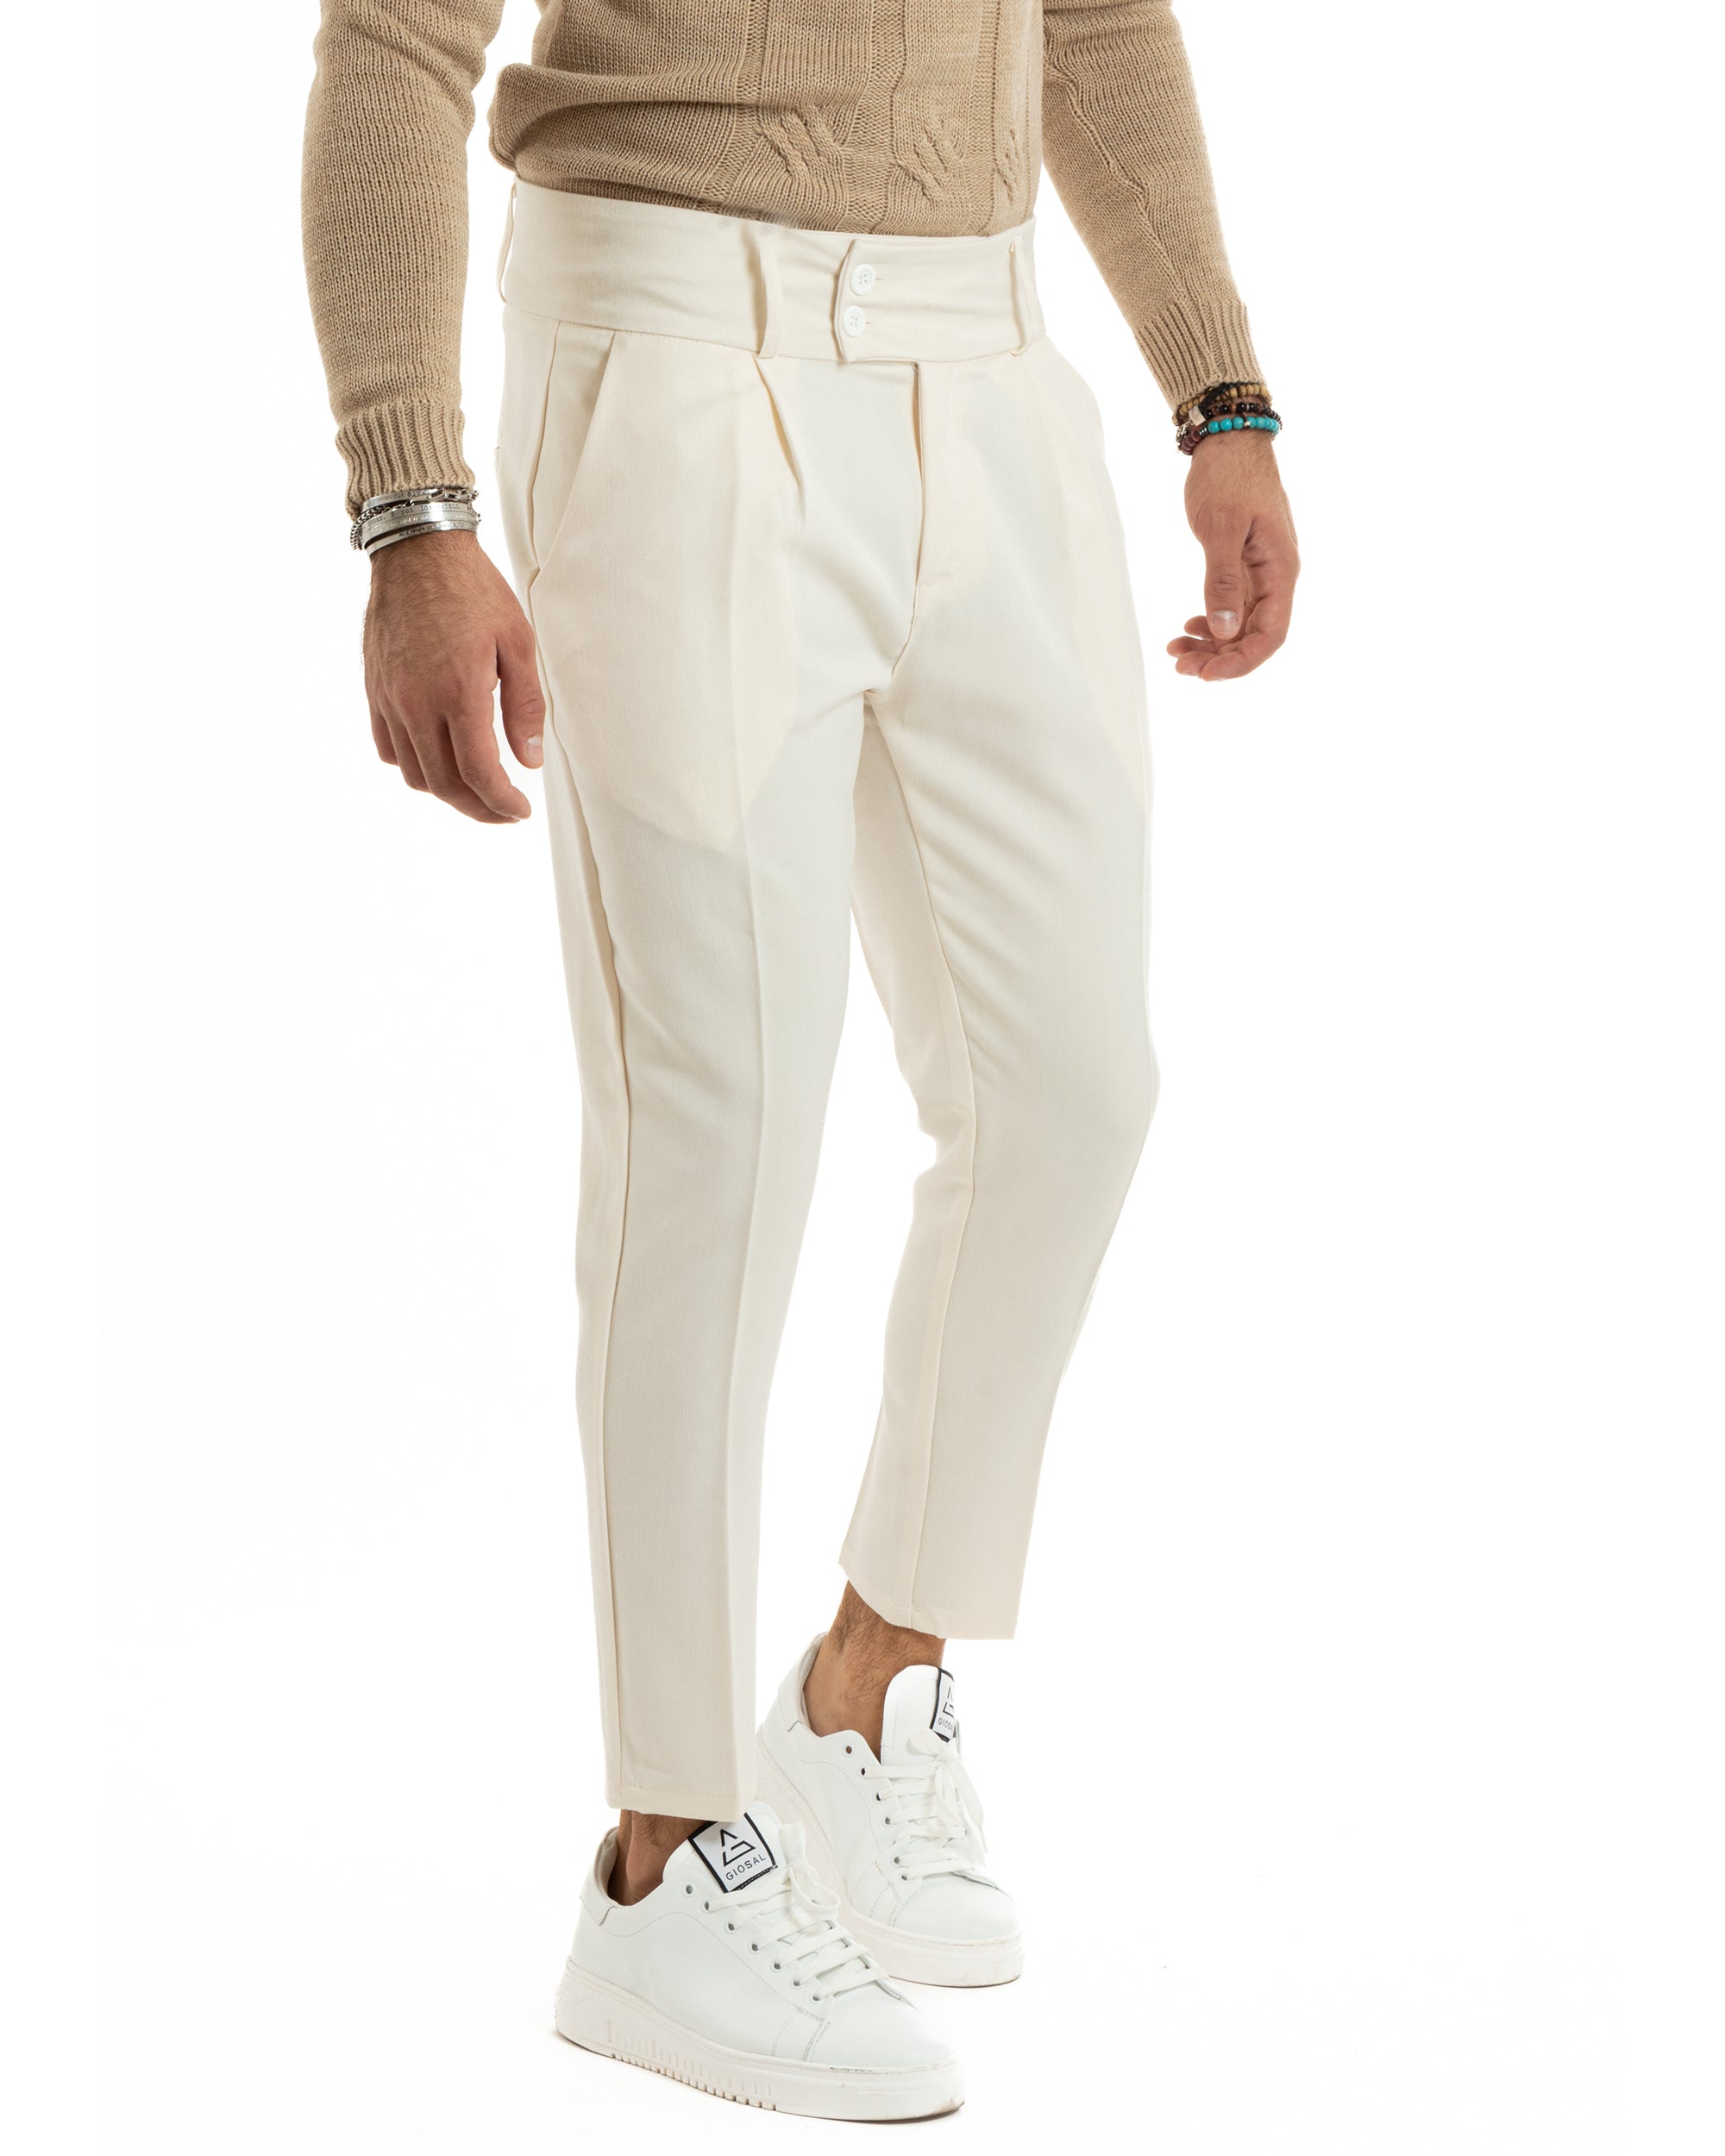 Classic Men's Trousers Elongated Button Viscose Casual Solid Color Denim GIOSAL-P5642A